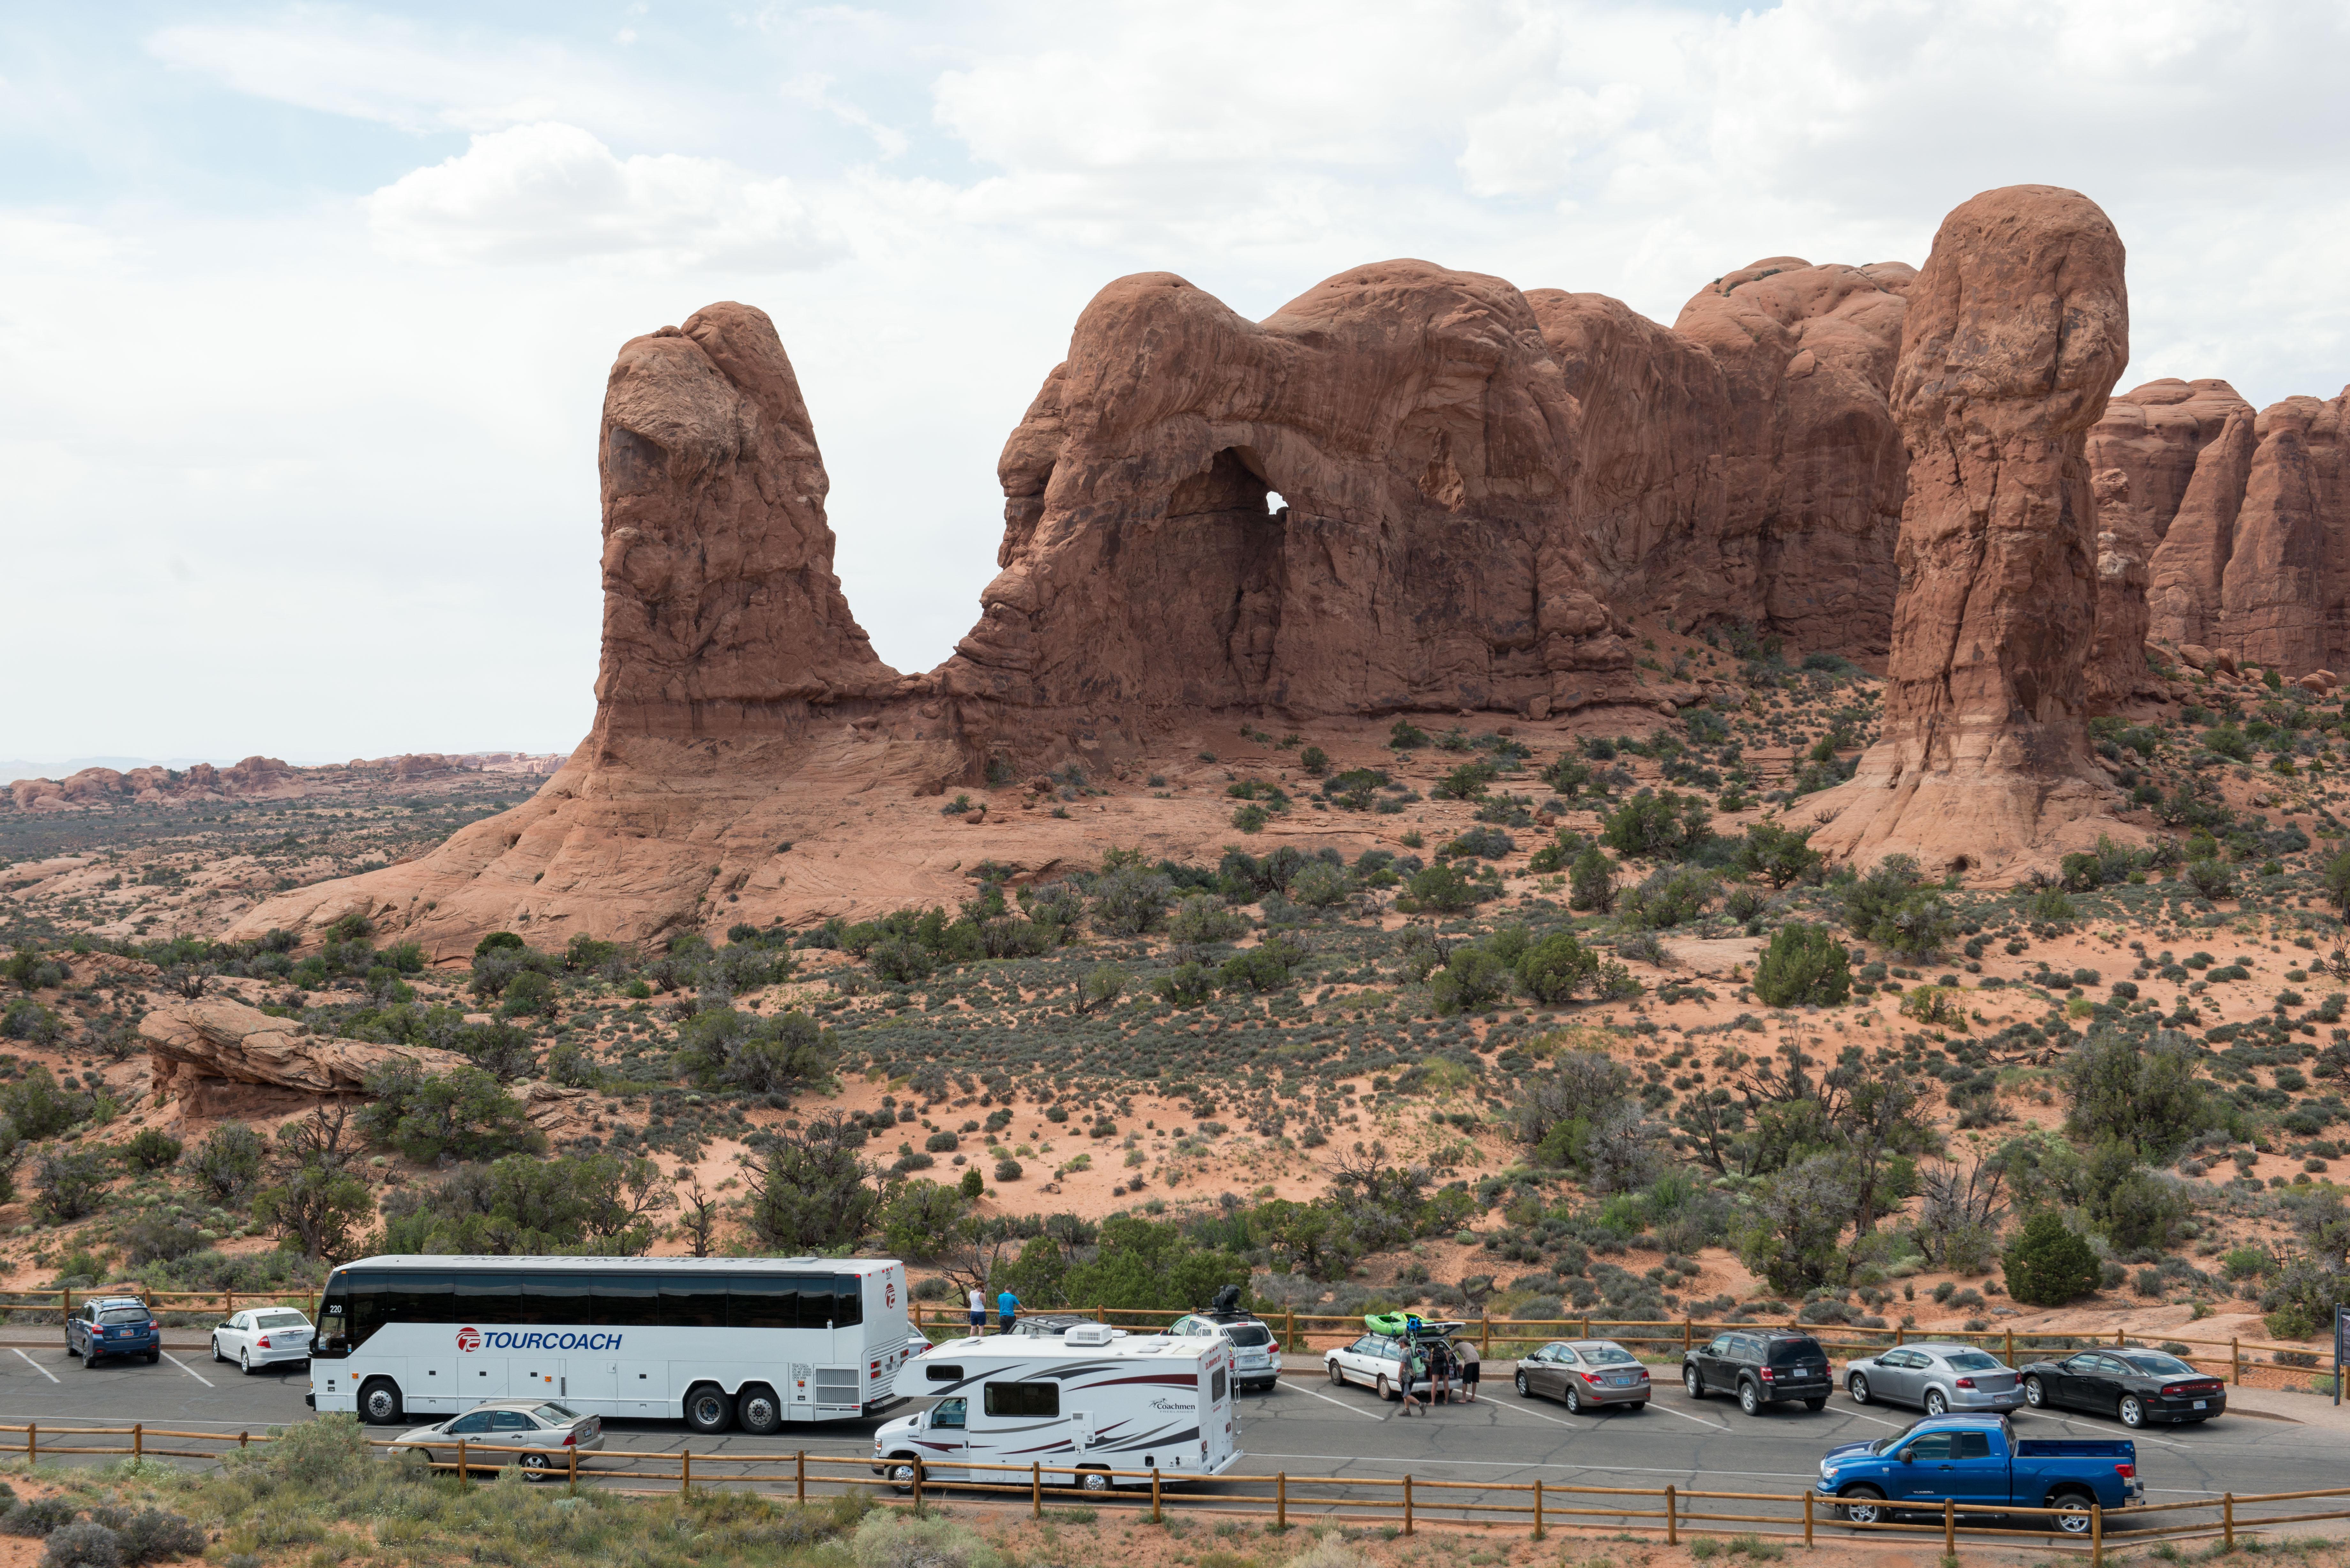 a bus, RV and several cars parked before tall rock formations